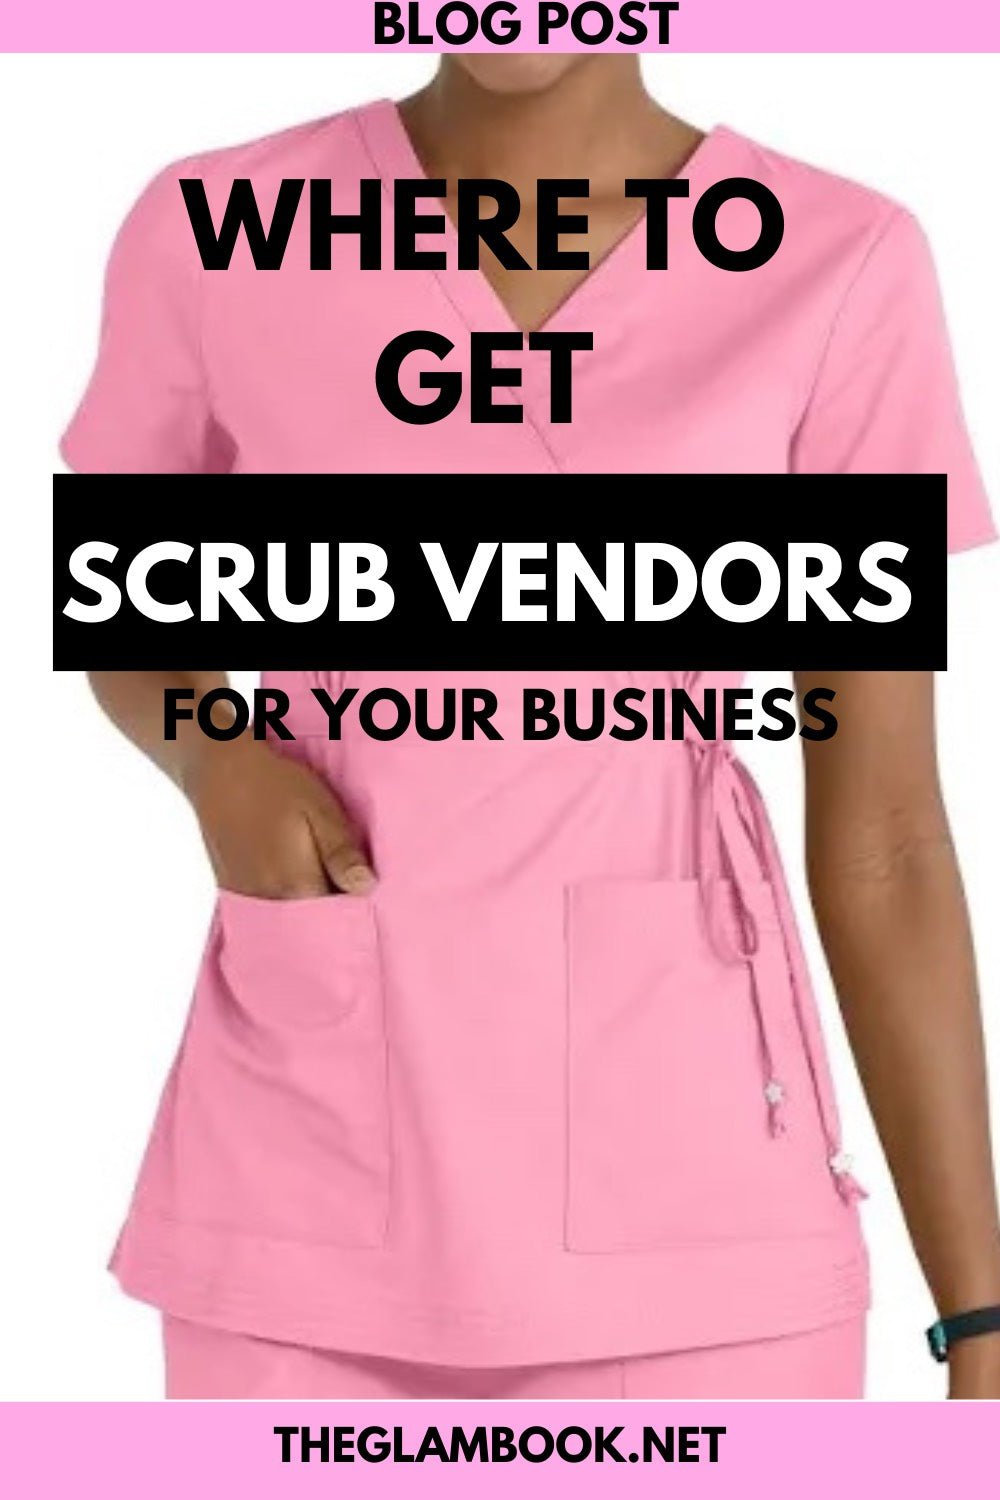 Where To Get Scrub Vendors To Start Your Own Business - THE GLAM BOOK VENDORS